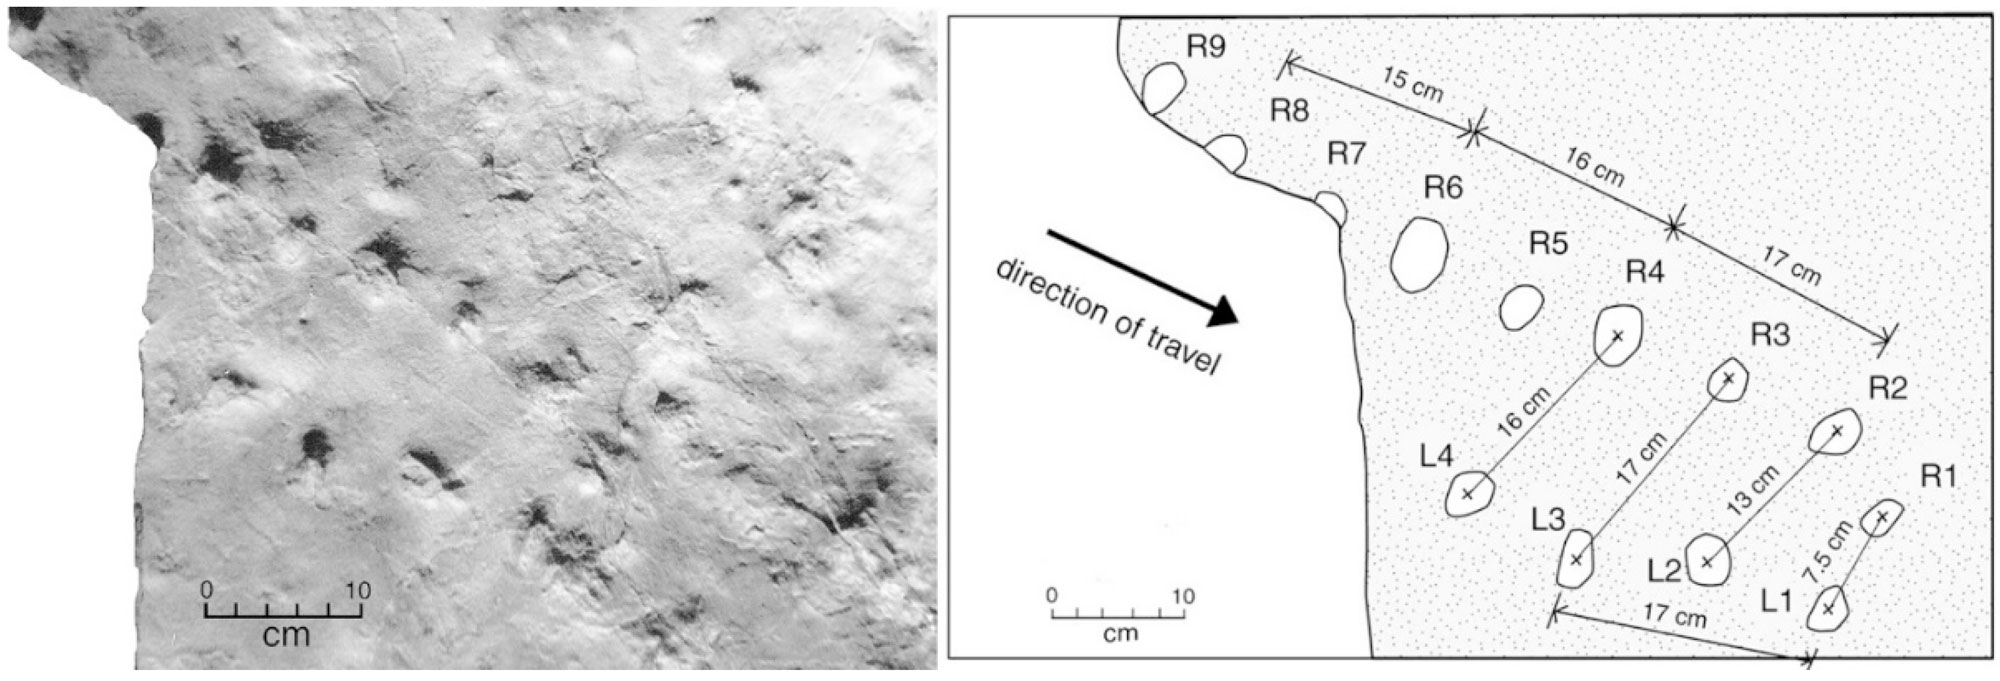 2-panel image. Panel 1: Black and white photograph of a turtle trackway from the Eocene of Washington. The tracks go from the upper left corner to the lower right corner of a rock slab. Panel 2: Drawing of the same slab shown in panel 1 indicating the positions of the tracks and the distances between them. Distances between left and right tracks are 7.5 to 16 centimeters. Distances between tracks in same line are 15 to 17 centimeters.